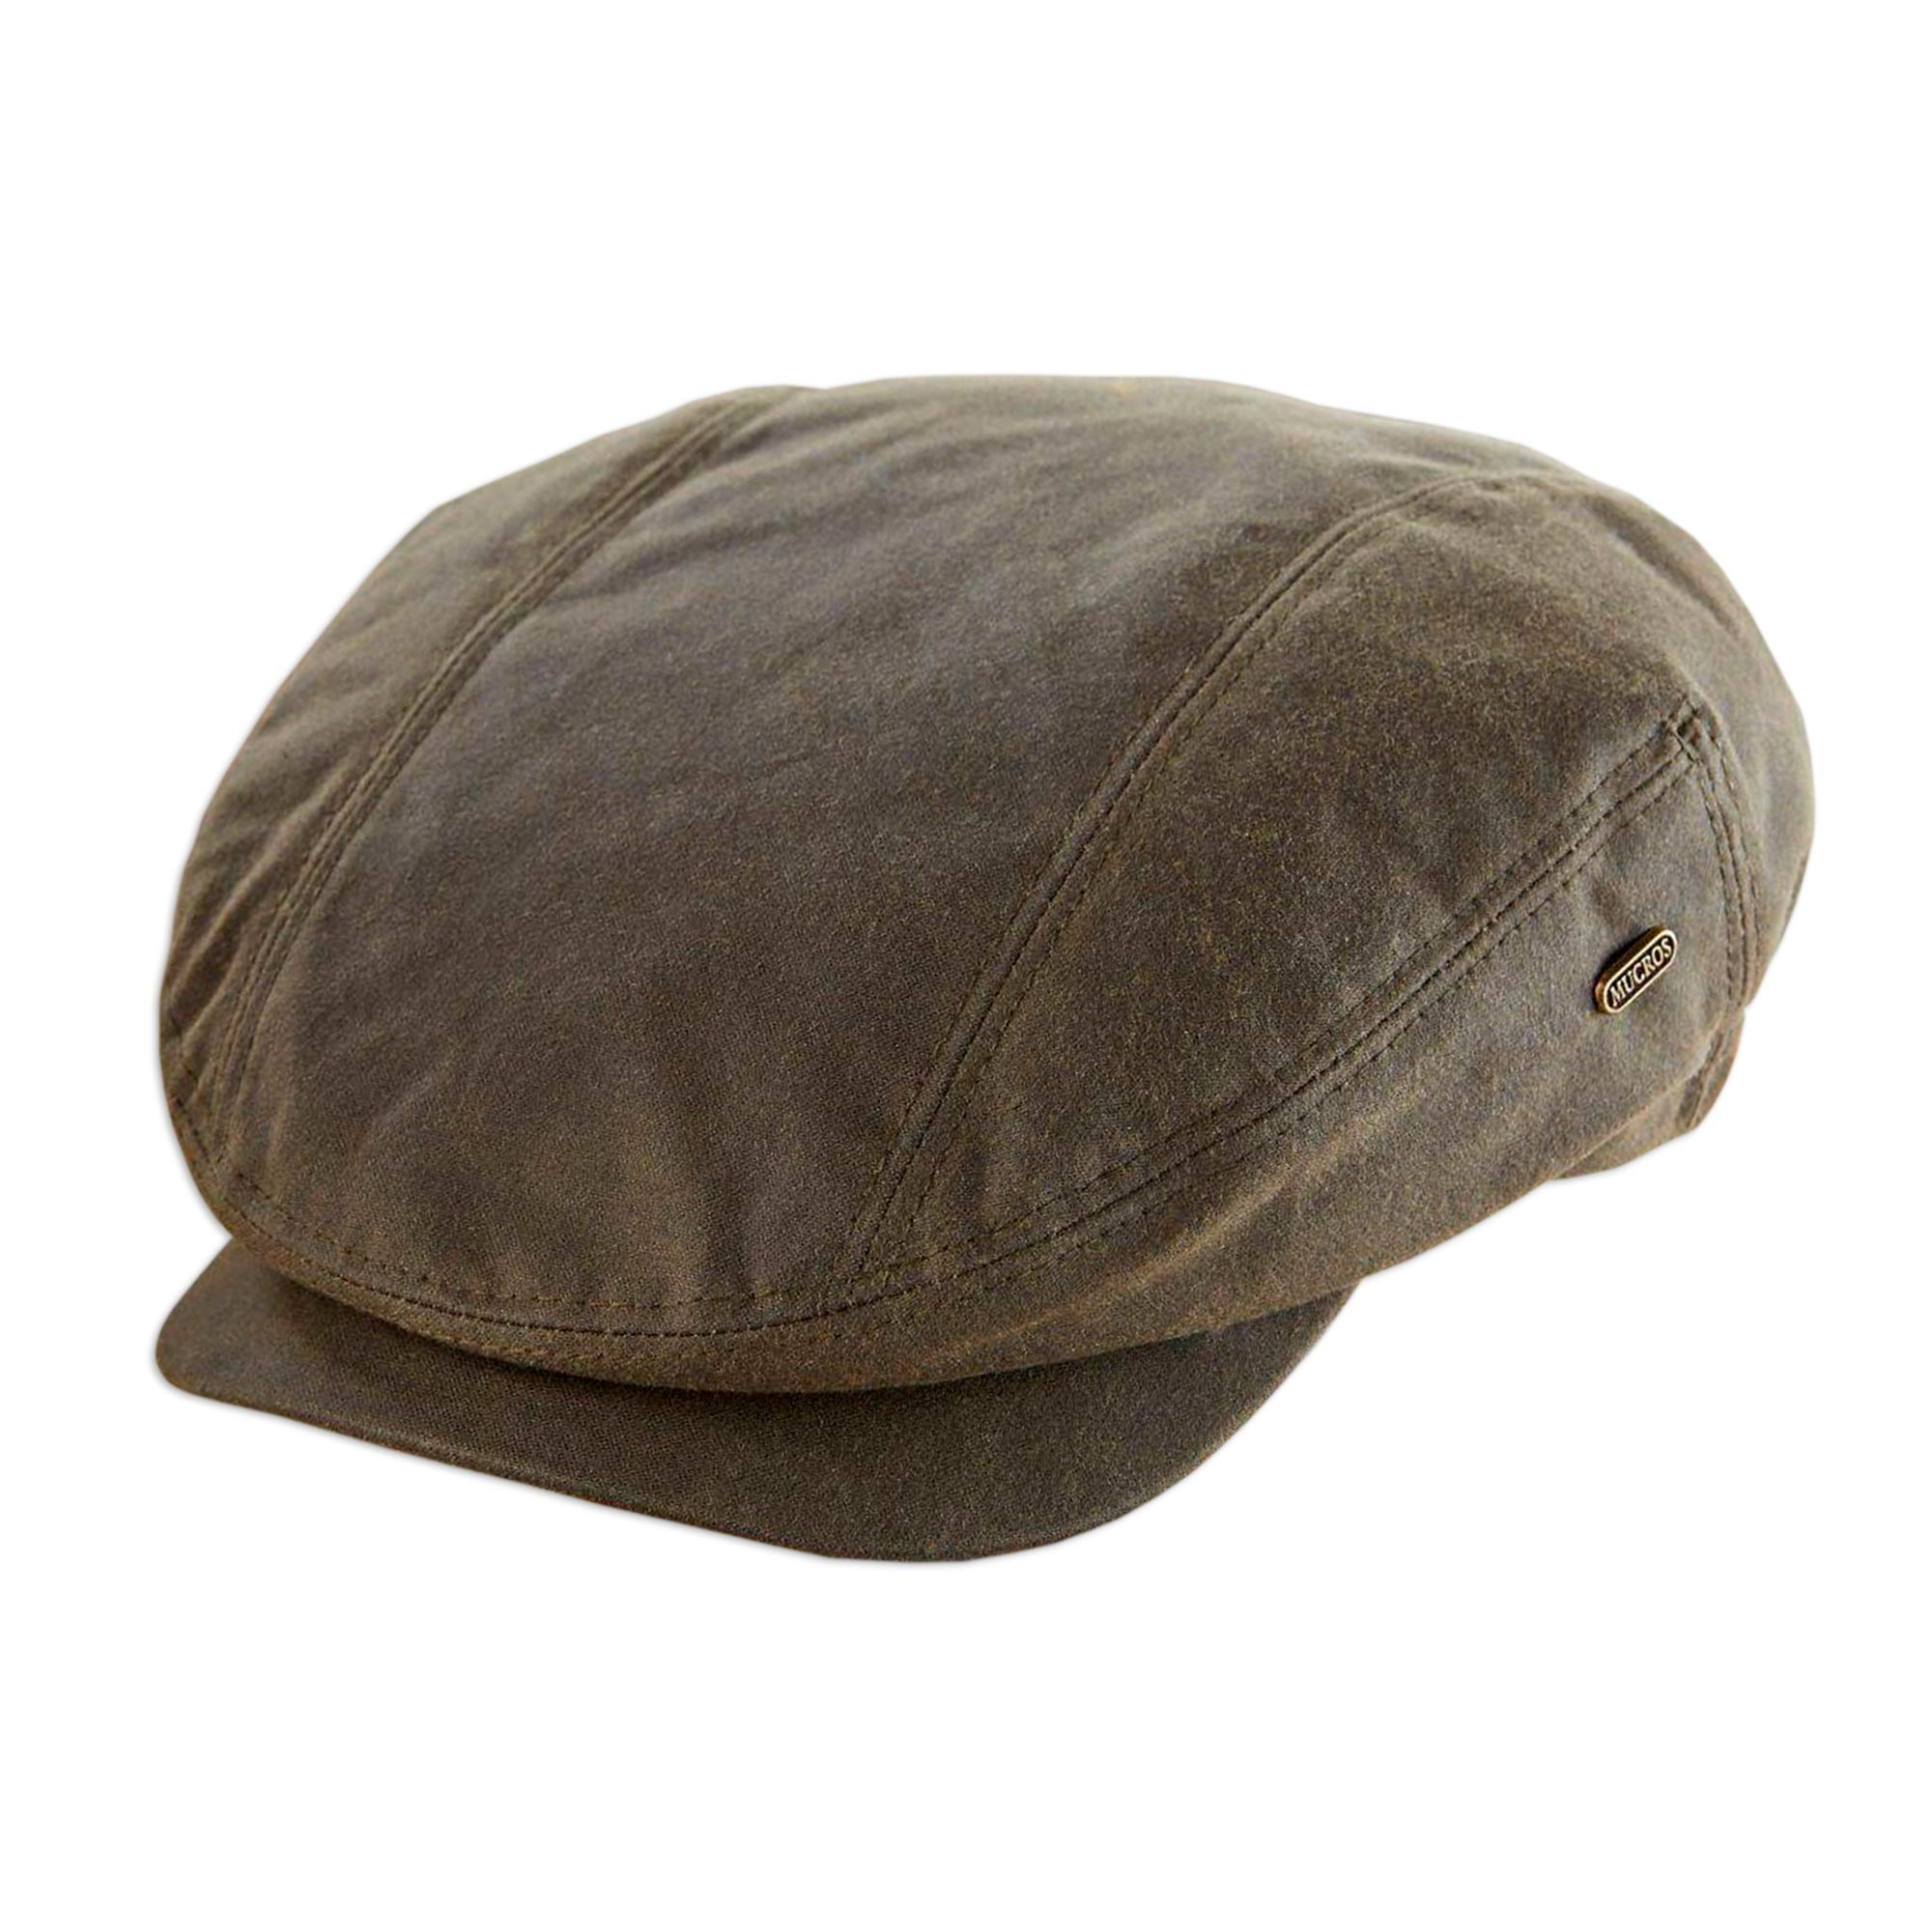 Olive Green Irish Waxed Cotton Quilt Lined Cap - Kerry | NOVICA